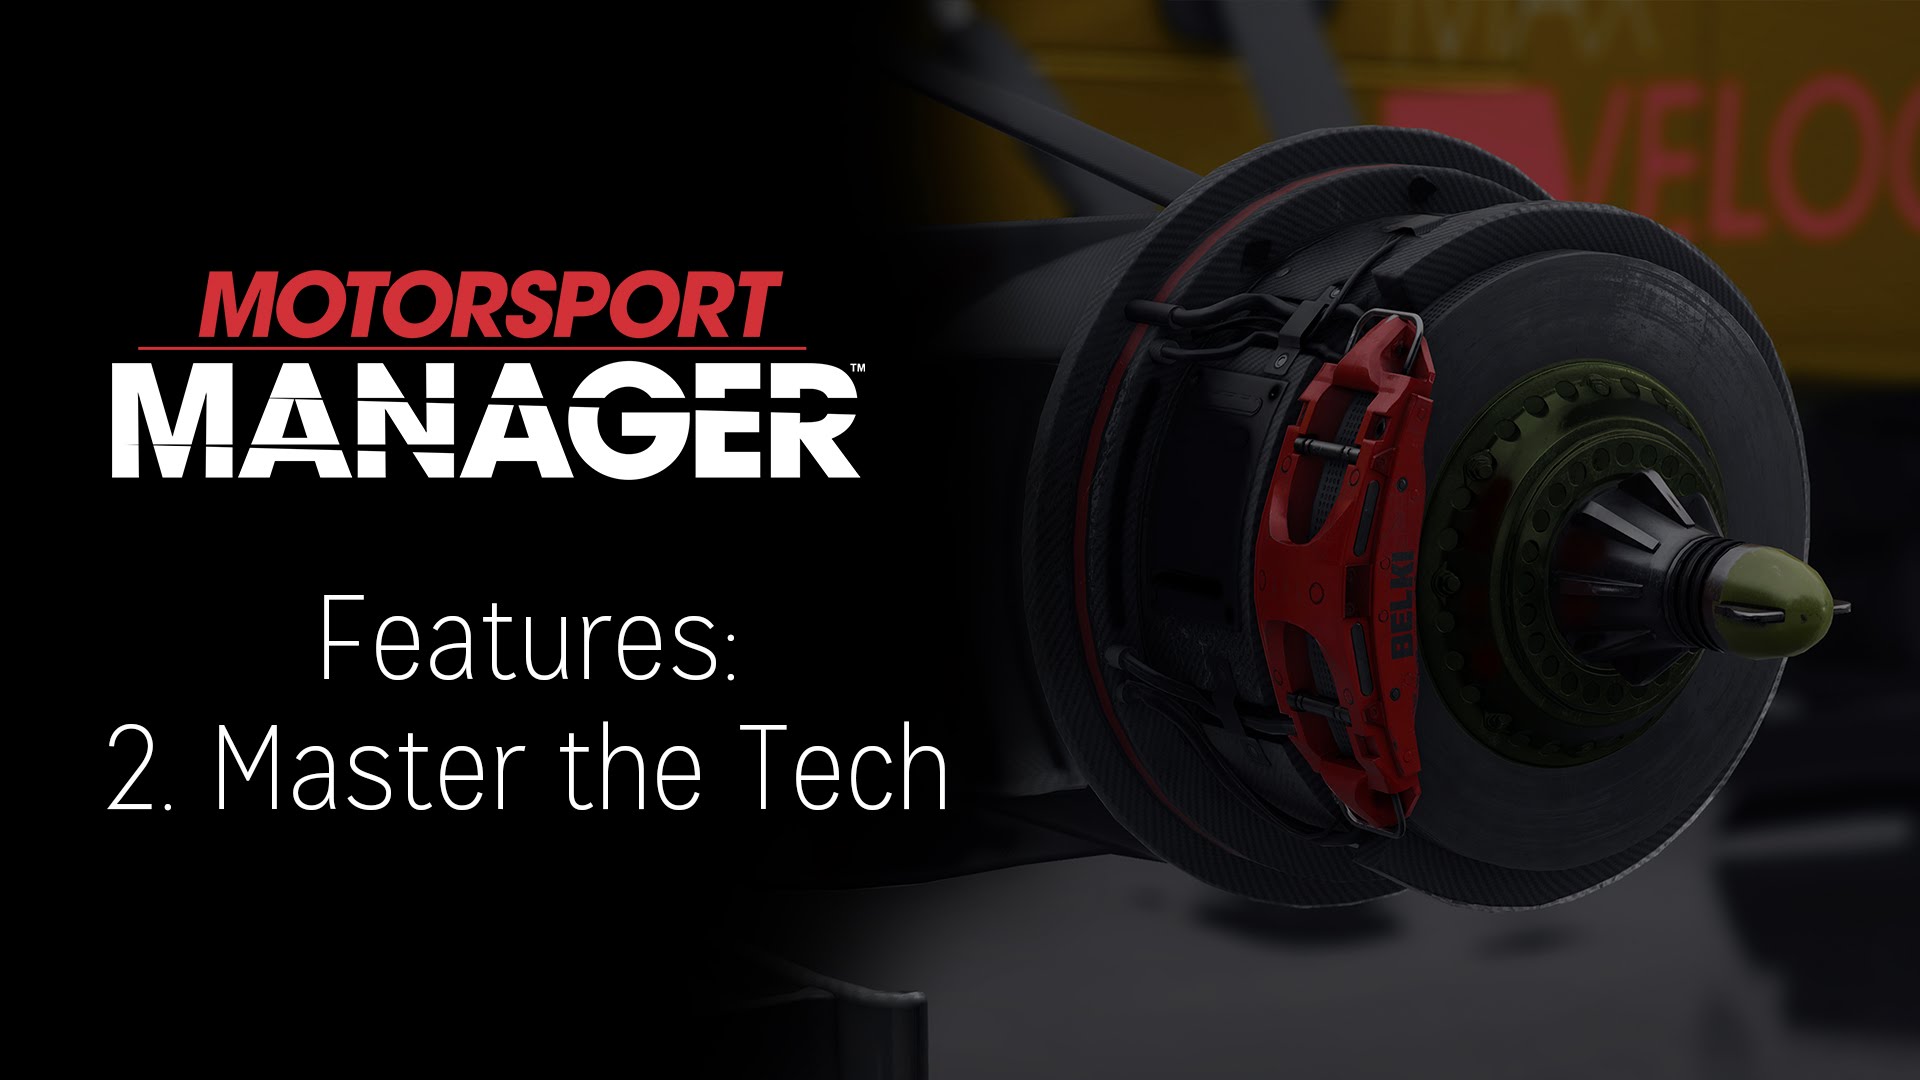 Motorsport Manager Features: 2. Master the Tech